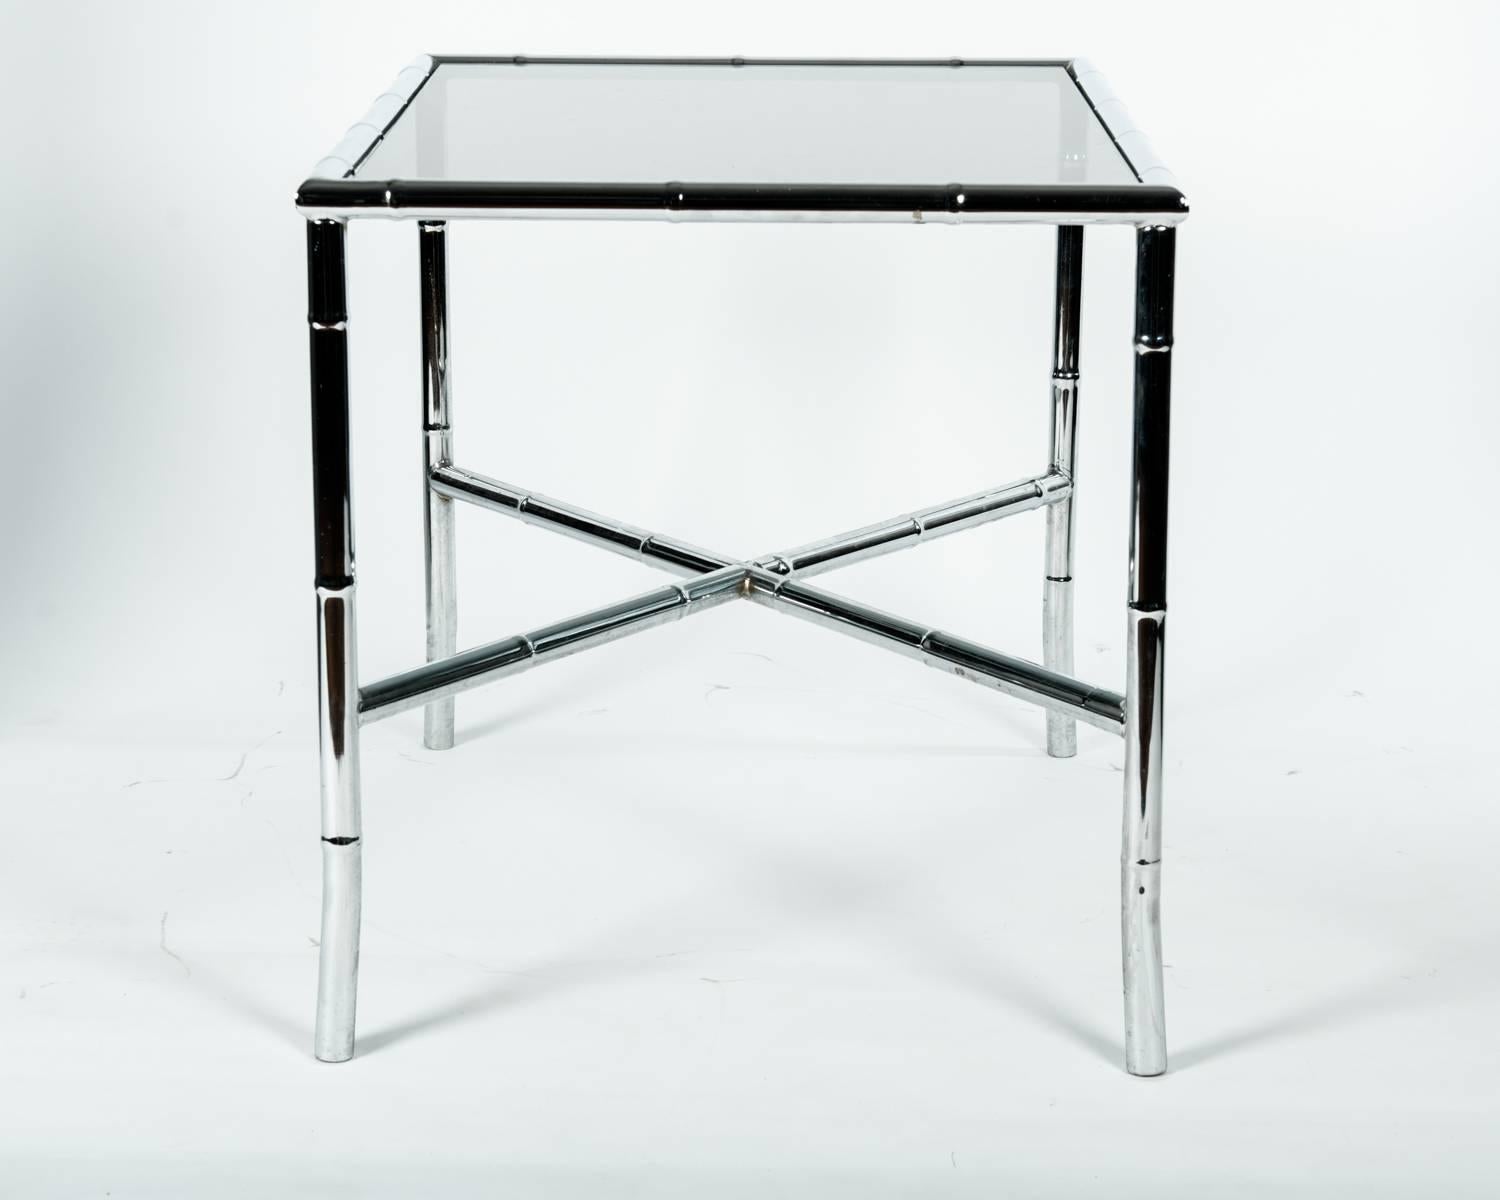 North American Mid-Century Modern Tinted Glass Top Coffee or Cocktail Table